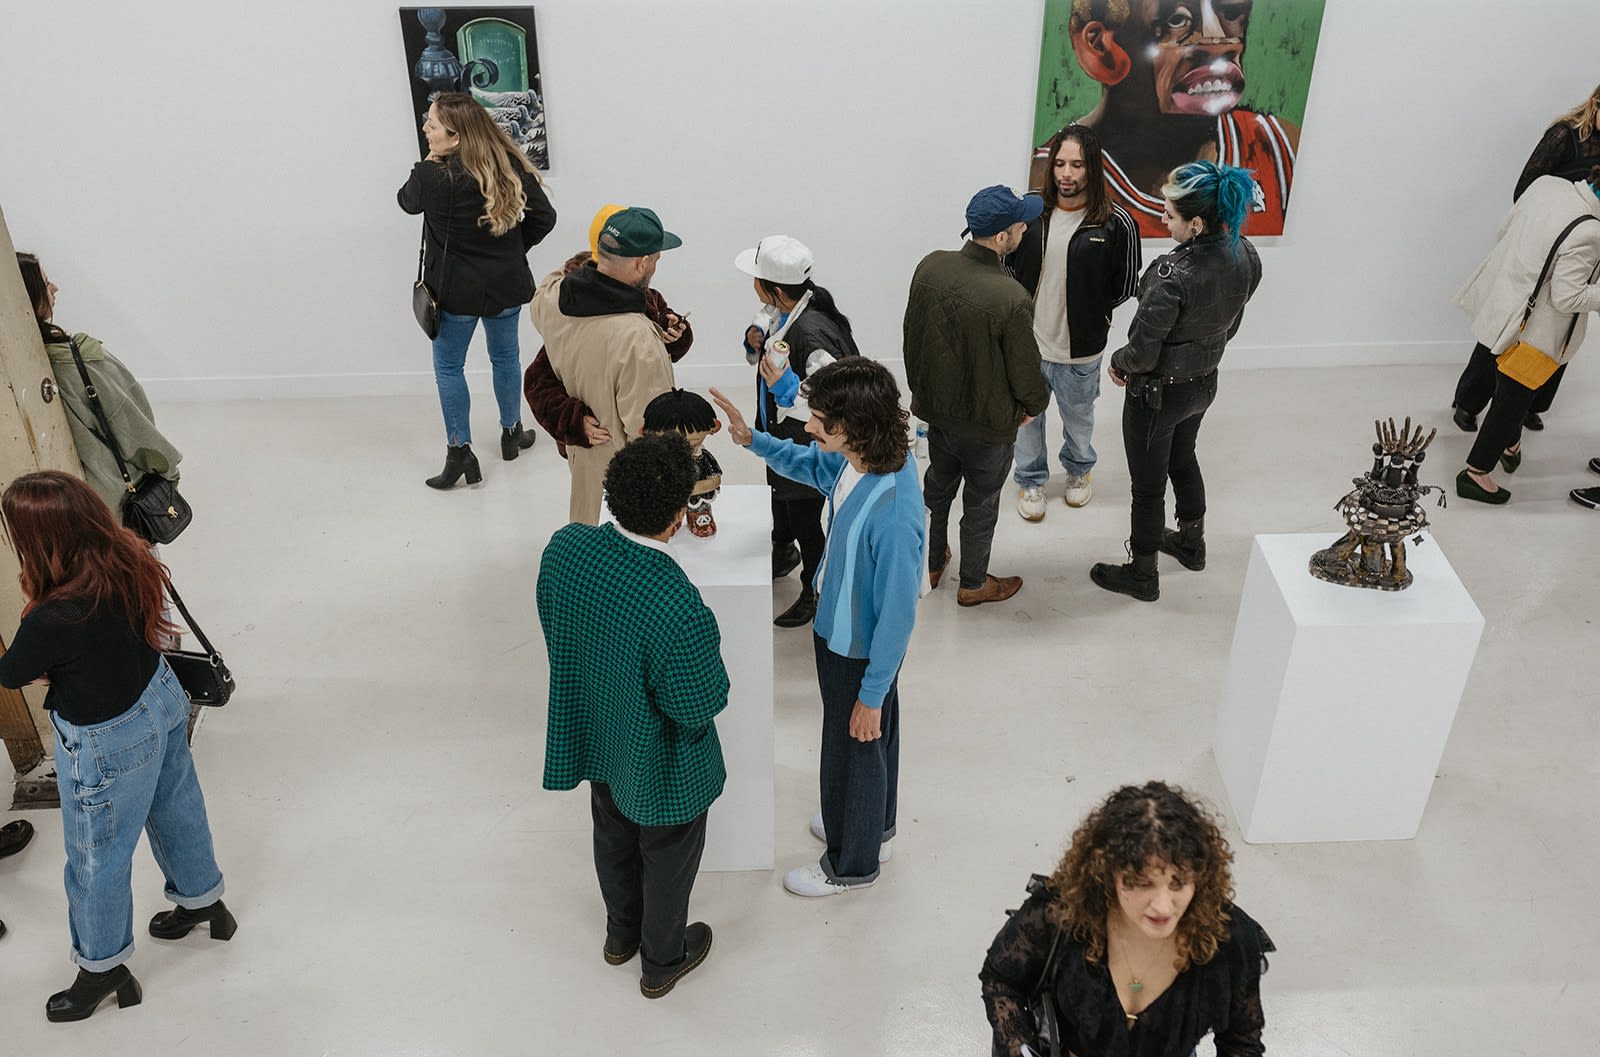 photograph of people inside the gallery surrounded by paintings and artwork